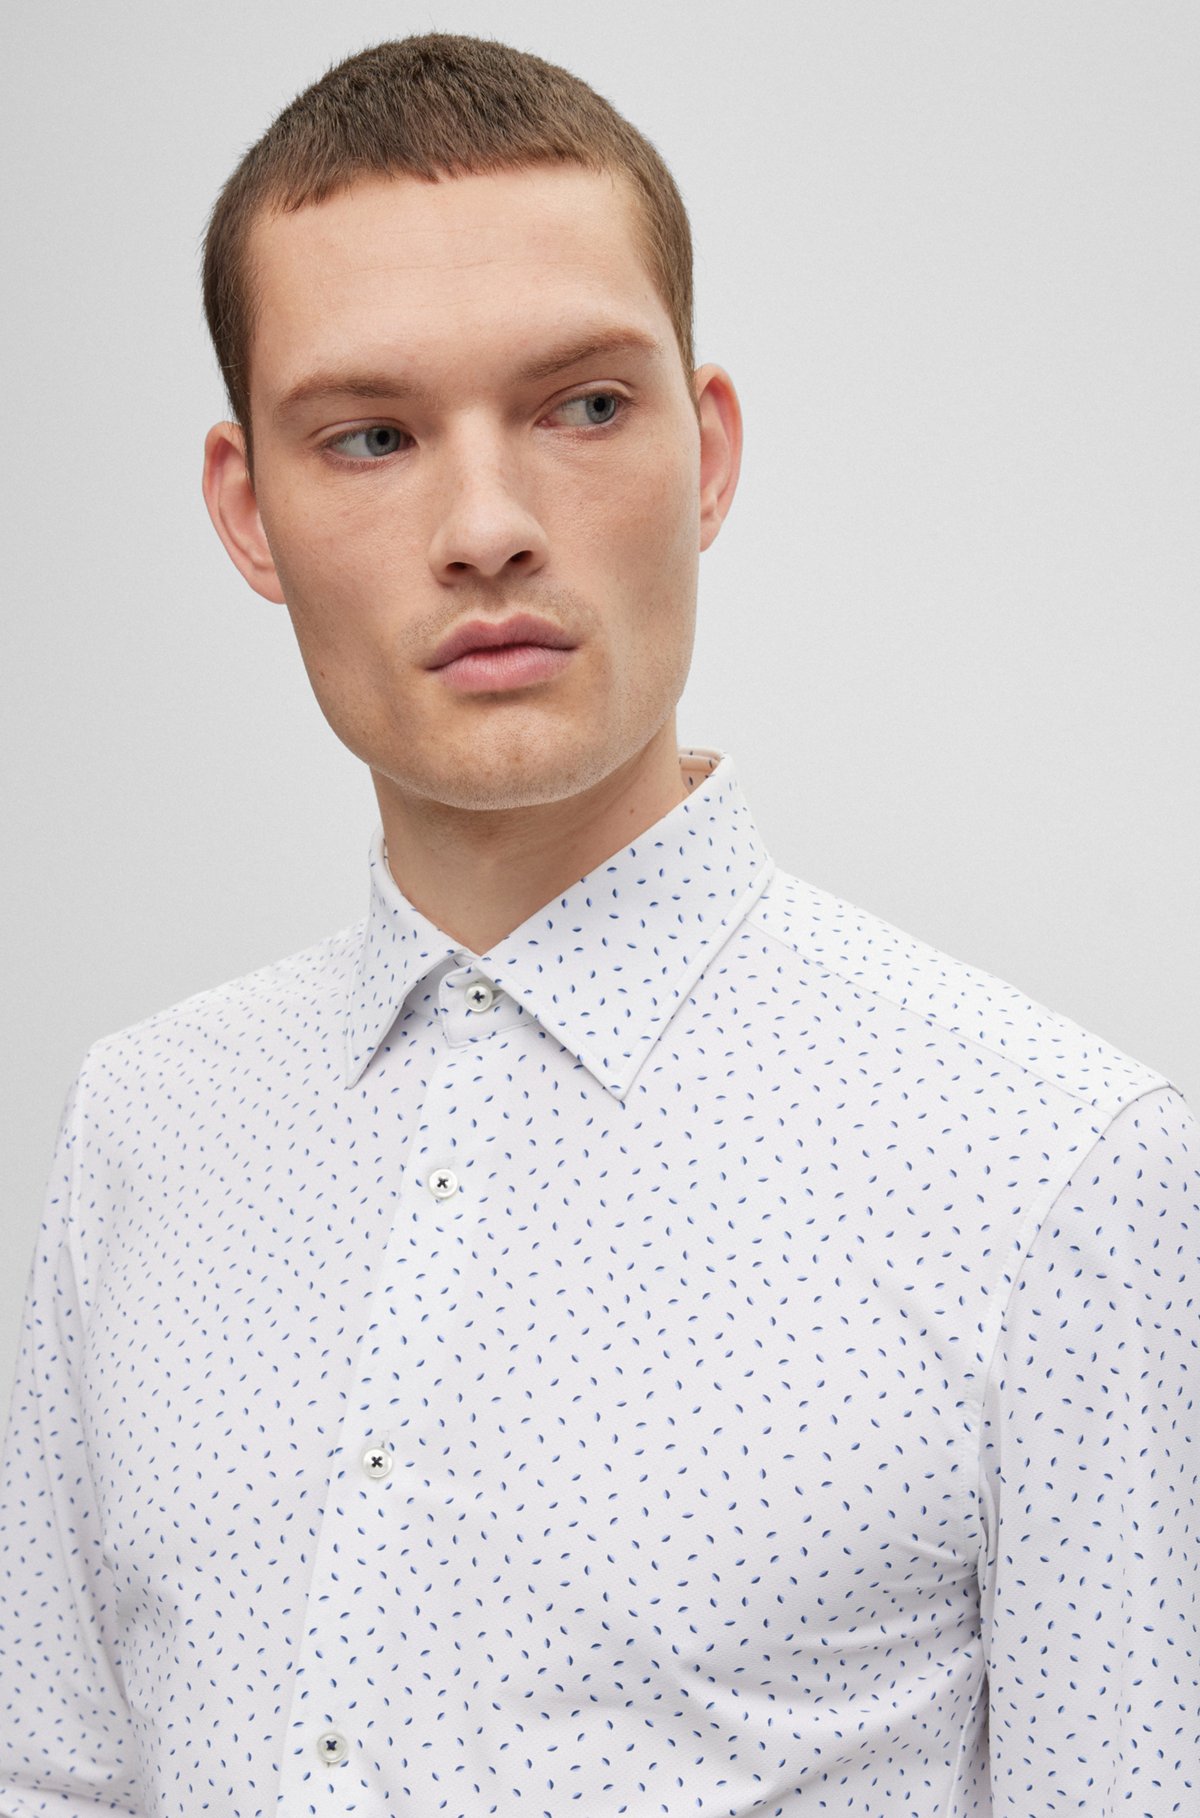 BOSS - Slim-fit shirt in patterned performance-stretch fabric